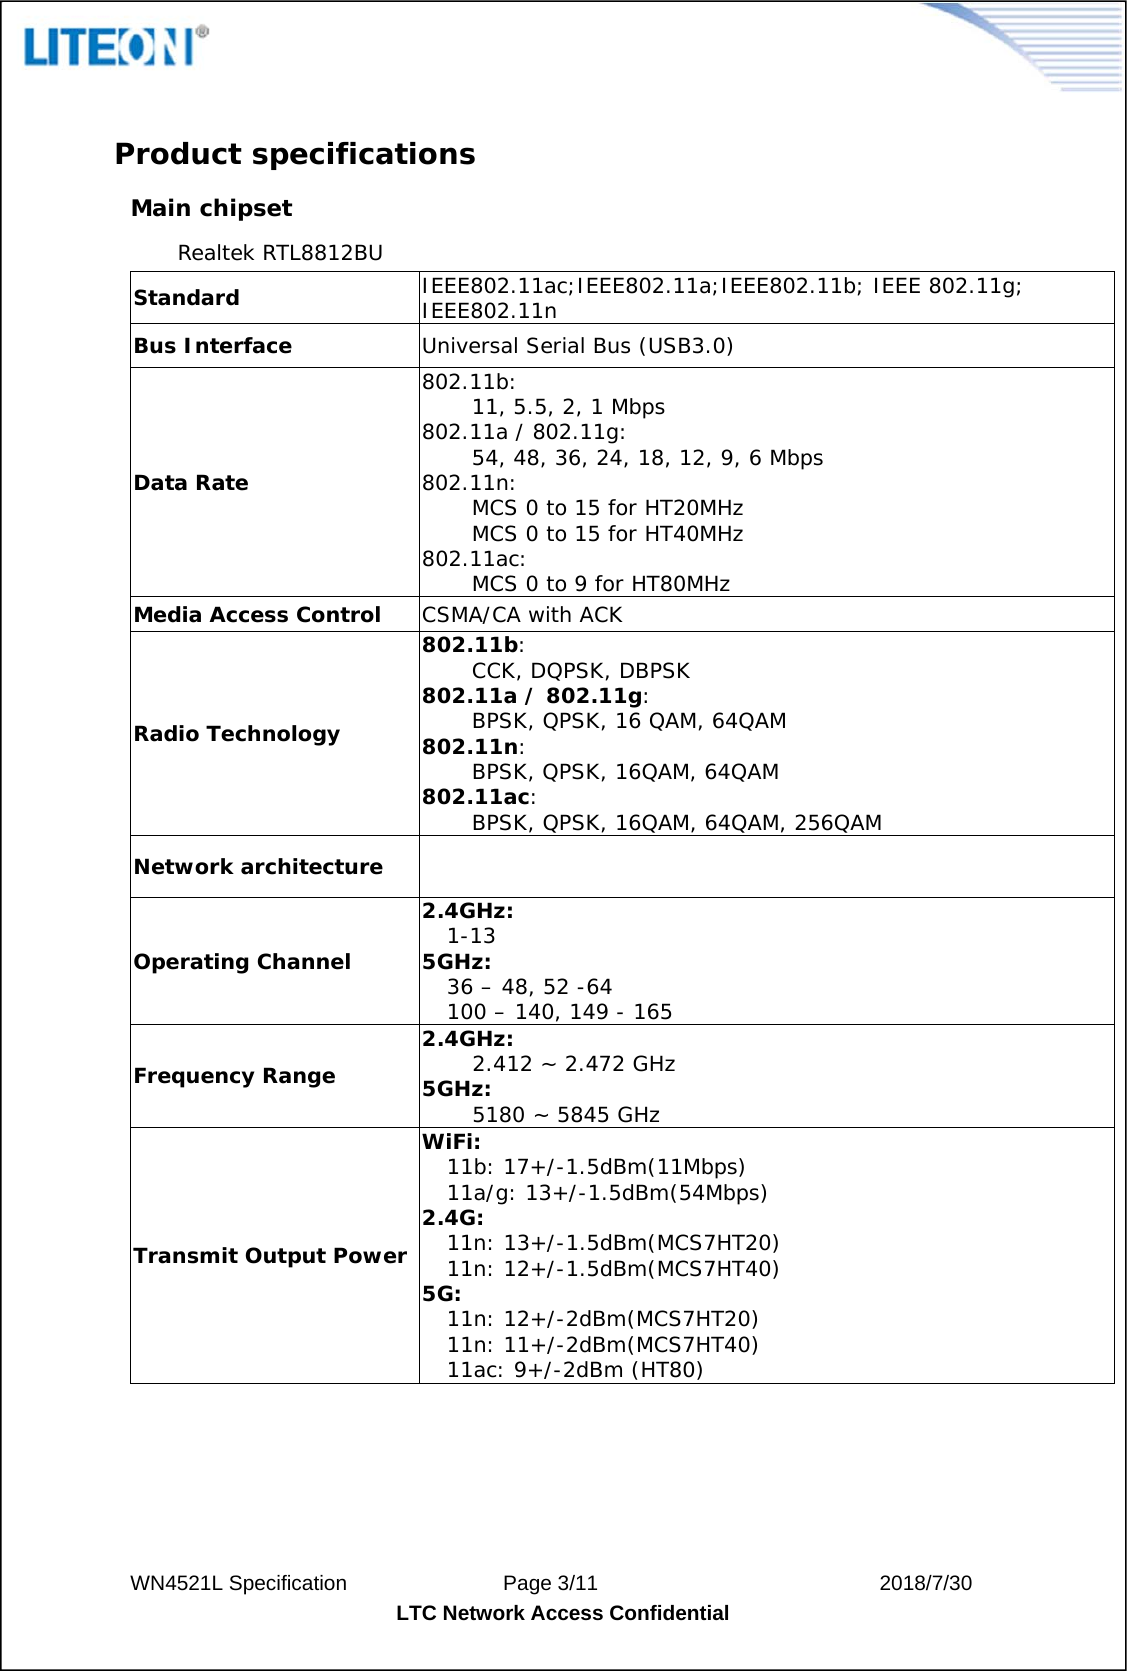  WN4521L Specification               Page 3/11                           2018/7/30 LTC Network Access Confidential   Product specifications  Main chipset Realtek RTL8812BU Standard  IEEE802.11ac;IEEE802.11a;IEEE802.11b; IEEE 802.11g; IEEE802.11n Bus Interface  Universal Serial Bus (USB3.0) Data Rate 802.11b: 11, 5.5, 2, 1 Mbps 802.11a / 802.11g: 54, 48, 36, 24, 18, 12, 9, 6 Mbps 802.11n:  MCS 0 to 15 for HT20MHz MCS 0 to 15 for HT40MHz 802.11ac:  MCS 0 to 9 for HT80MHz Media Access Control  CSMA/CA with ACK Radio Technology 802.11b: CCK, DQPSK, DBPSK 802.11a / 802.11g: BPSK, QPSK, 16 QAM, 64QAM 802.11n: BPSK, QPSK, 16QAM, 64QAM 802.11ac: BPSK, QPSK, 16QAM, 64QAM, 256QAM Network architecture   Operating Channel 2.4GHz: 1-13 5GHz: 36 – 48, 52 -64 100 – 140, 149 - 165 Frequency Range 2.4GHz: 2.412 ~ 2.472 GHz 5GHz: 5180 ~ 5845 GHz Transmit Output Power WiFi: 11b: 17+/-1.5dBm(11Mbps) 11a/g: 13+/-1.5dBm(54Mbps) 2.4G: 11n: 13+/-1.5dBm(MCS7HT20) 11n: 12+/-1.5dBm(MCS7HT40) 5G: 11n: 12+/-2dBm(MCS7HT20) 11n: 11+/-2dBm(MCS7HT40) 11ac: 9+/-2dBm (HT80) 